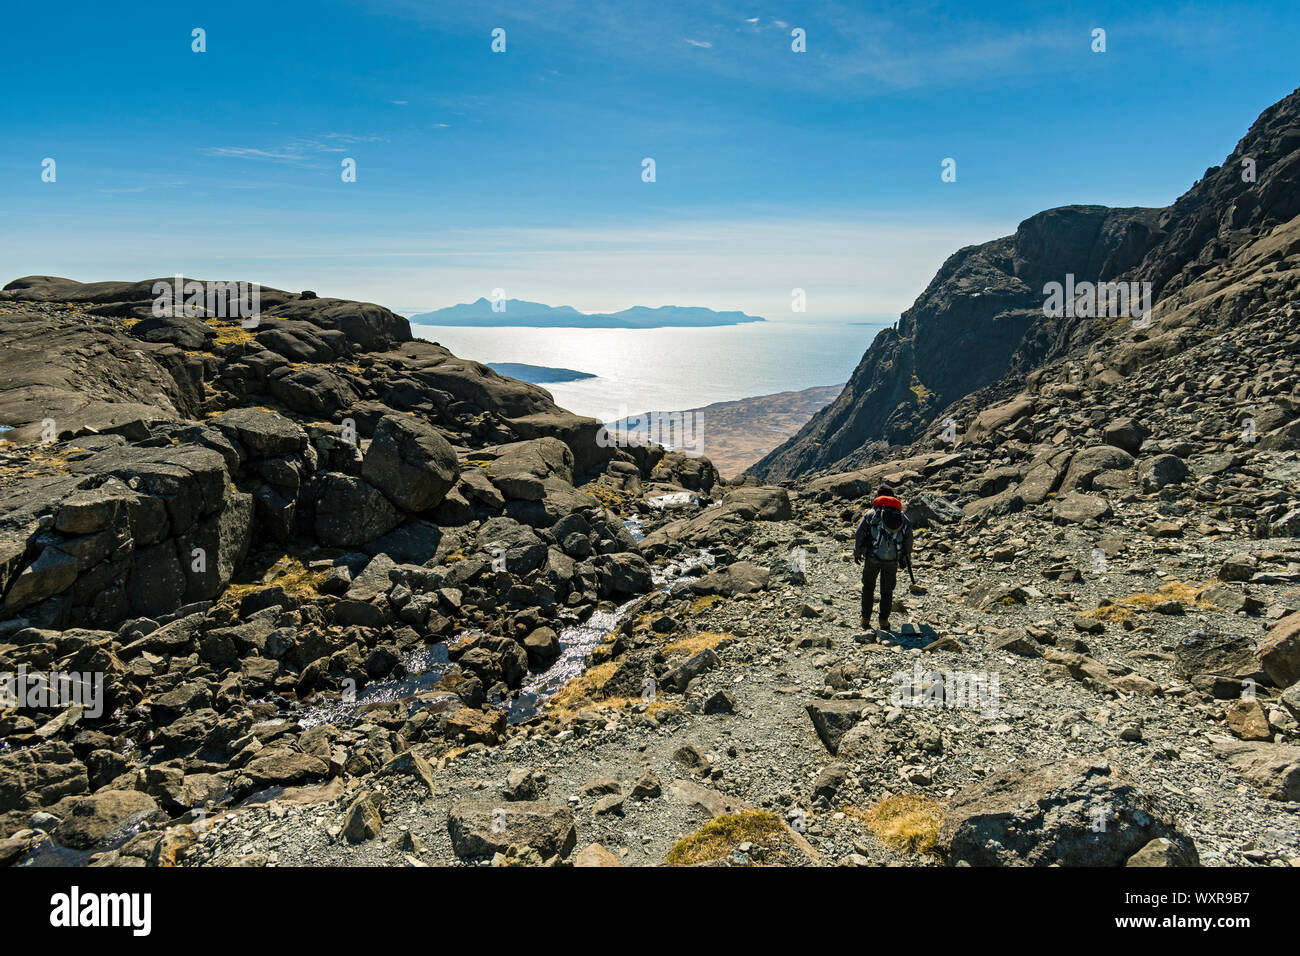 The island of Rum from the lip of Coir' a'Ghrunnda in the Cuillin mountains, Isle of Skye, Scotland, UK Stock Photo